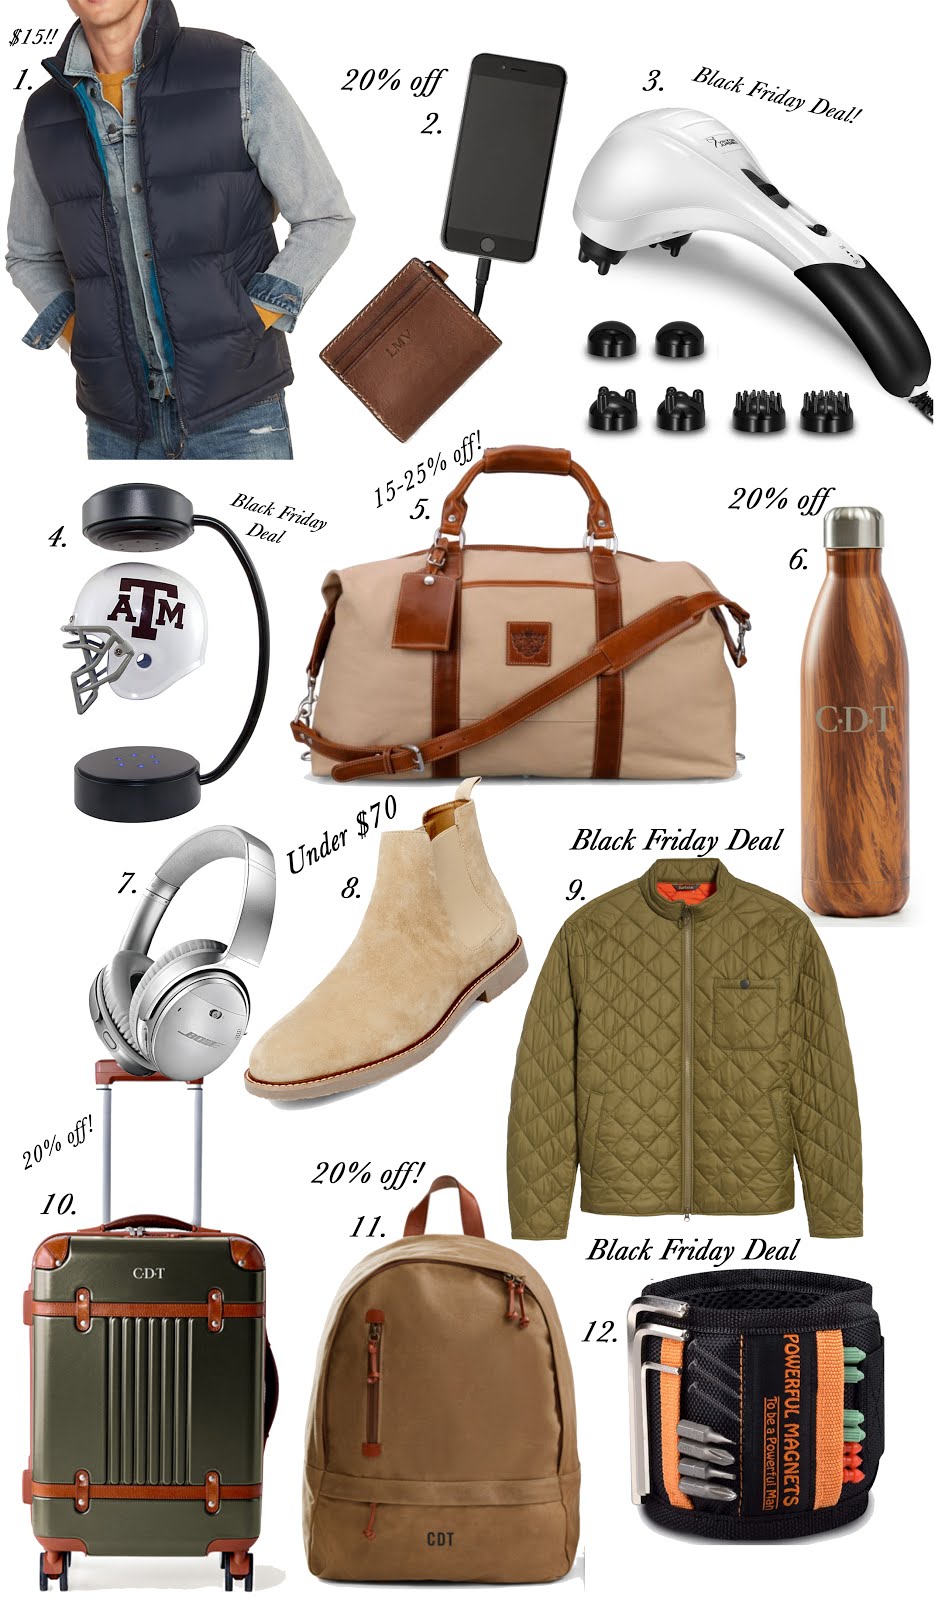 Black Friday/Cyber Monday 2019 - Favorite Finds & Sales to Note - Something Delightful Blog